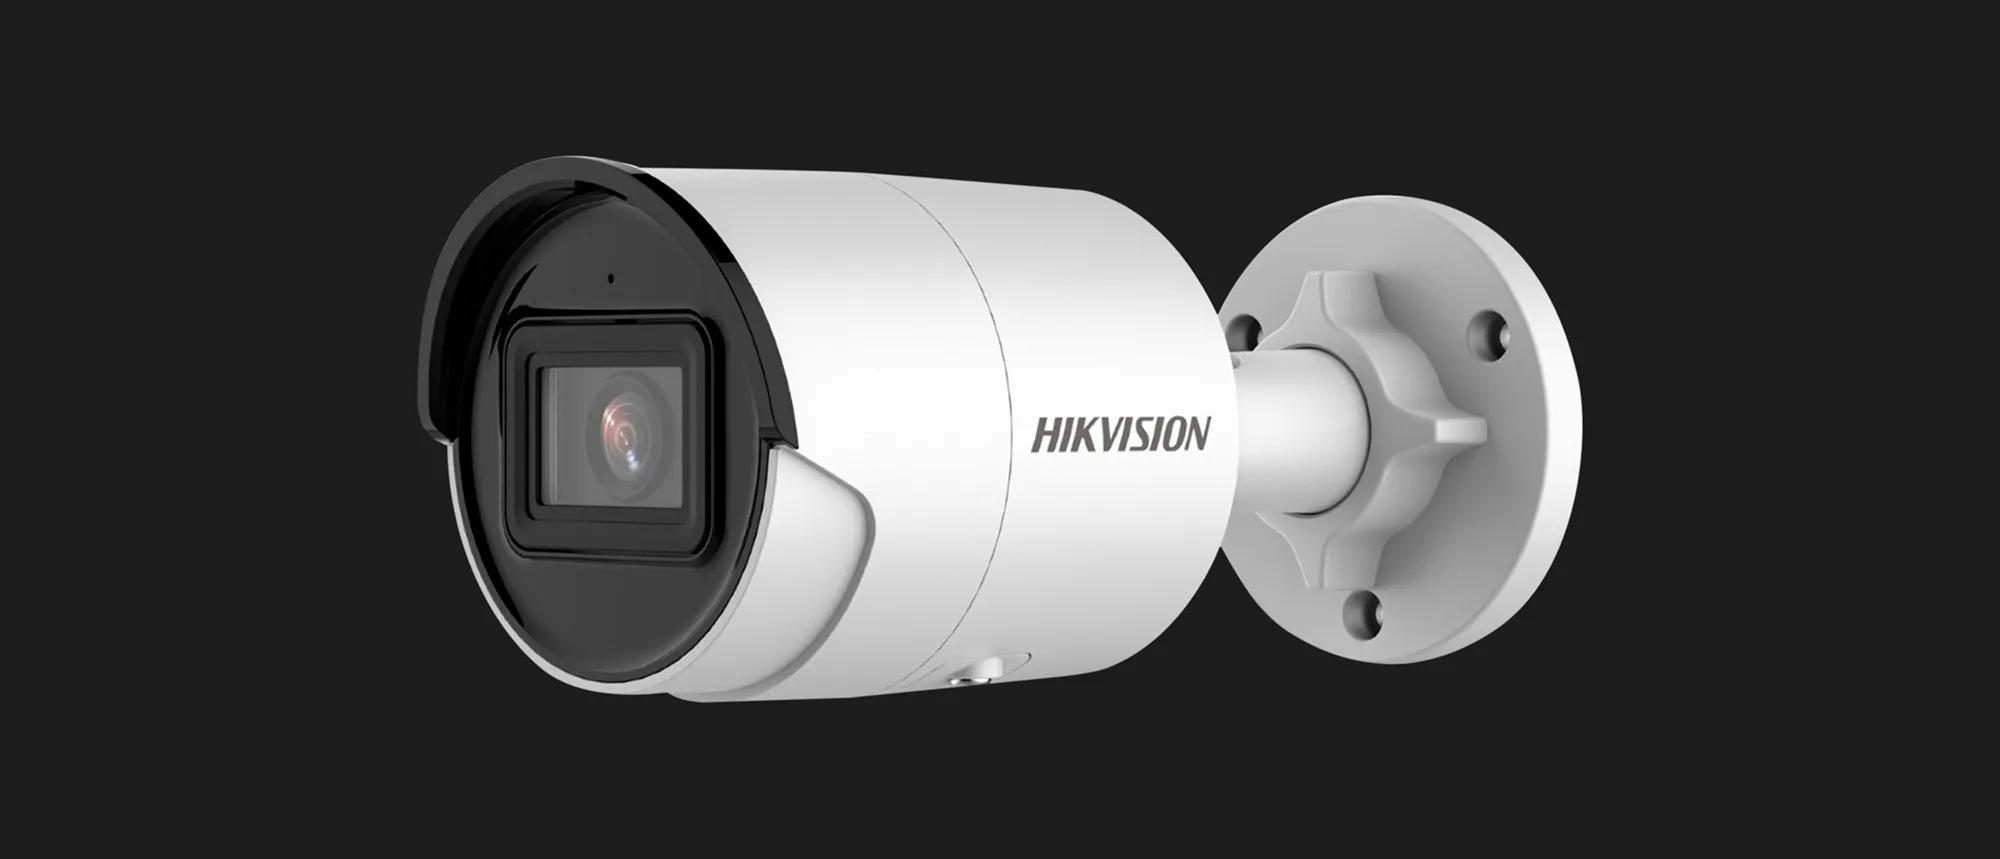 IP камера Hikvision DS-2CD2083G2-I (2.8мм)